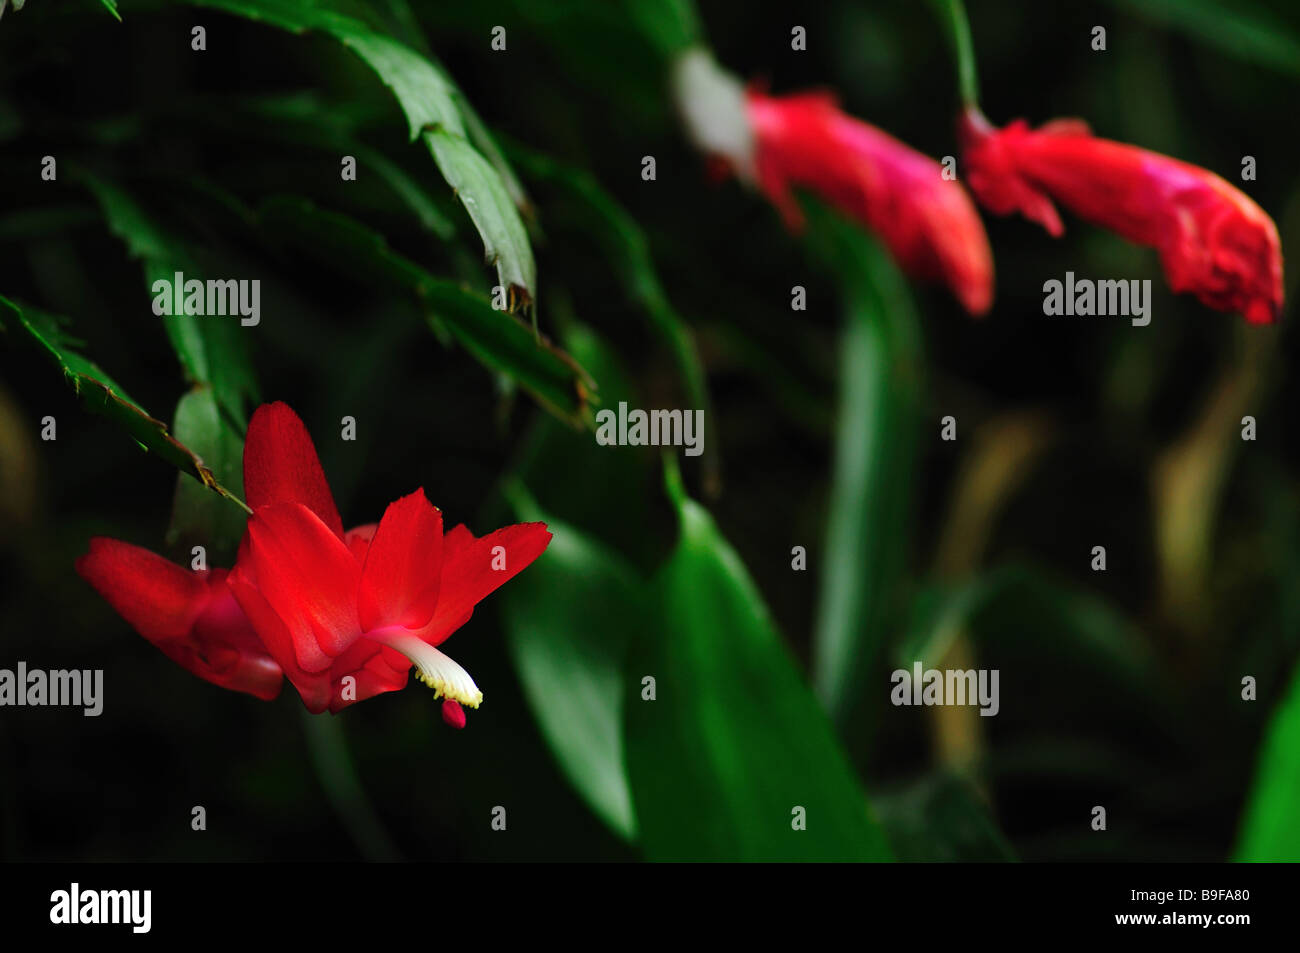 rain forest tropical flowers against background of green foliage Stock Photo